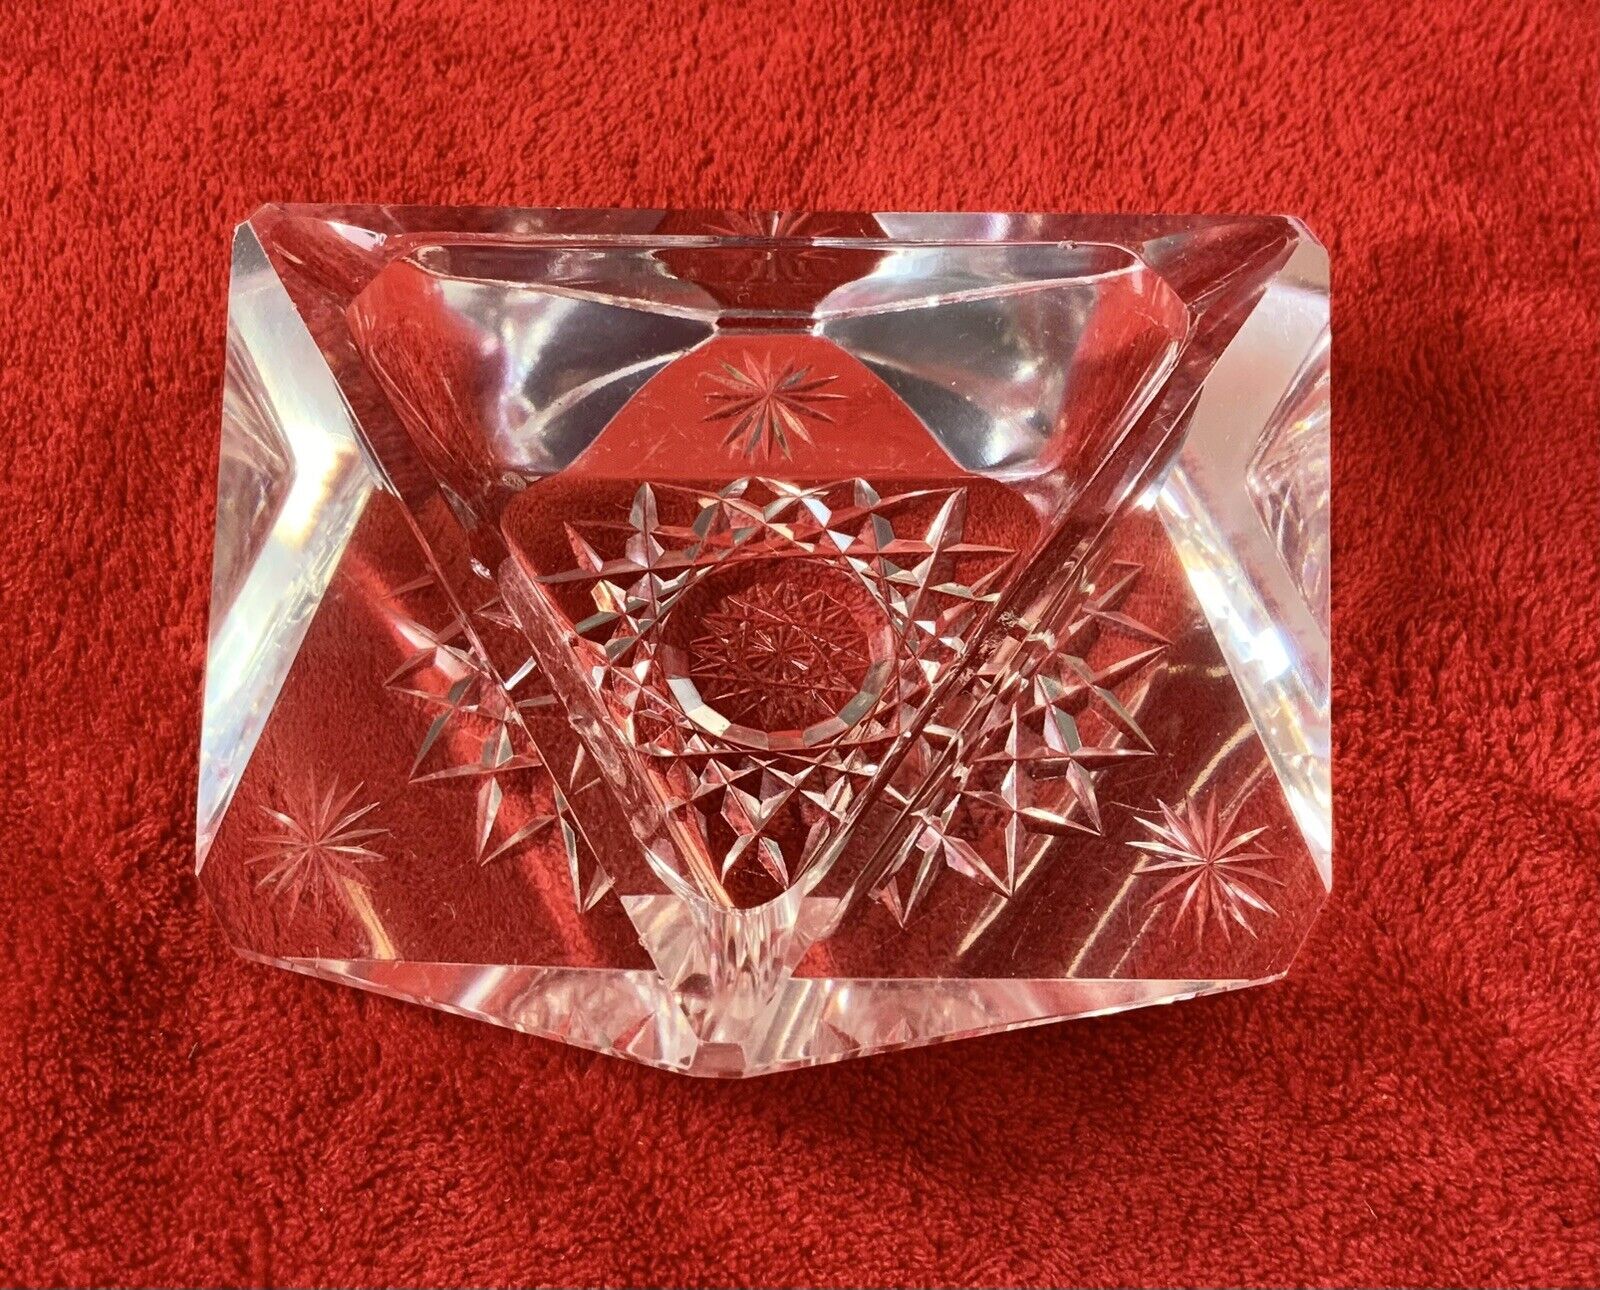 VINTAGE ART DECO DESIGN FACETED HEAVY CRYSTAL TRIANGULAR ASHTRAY…STUNNING